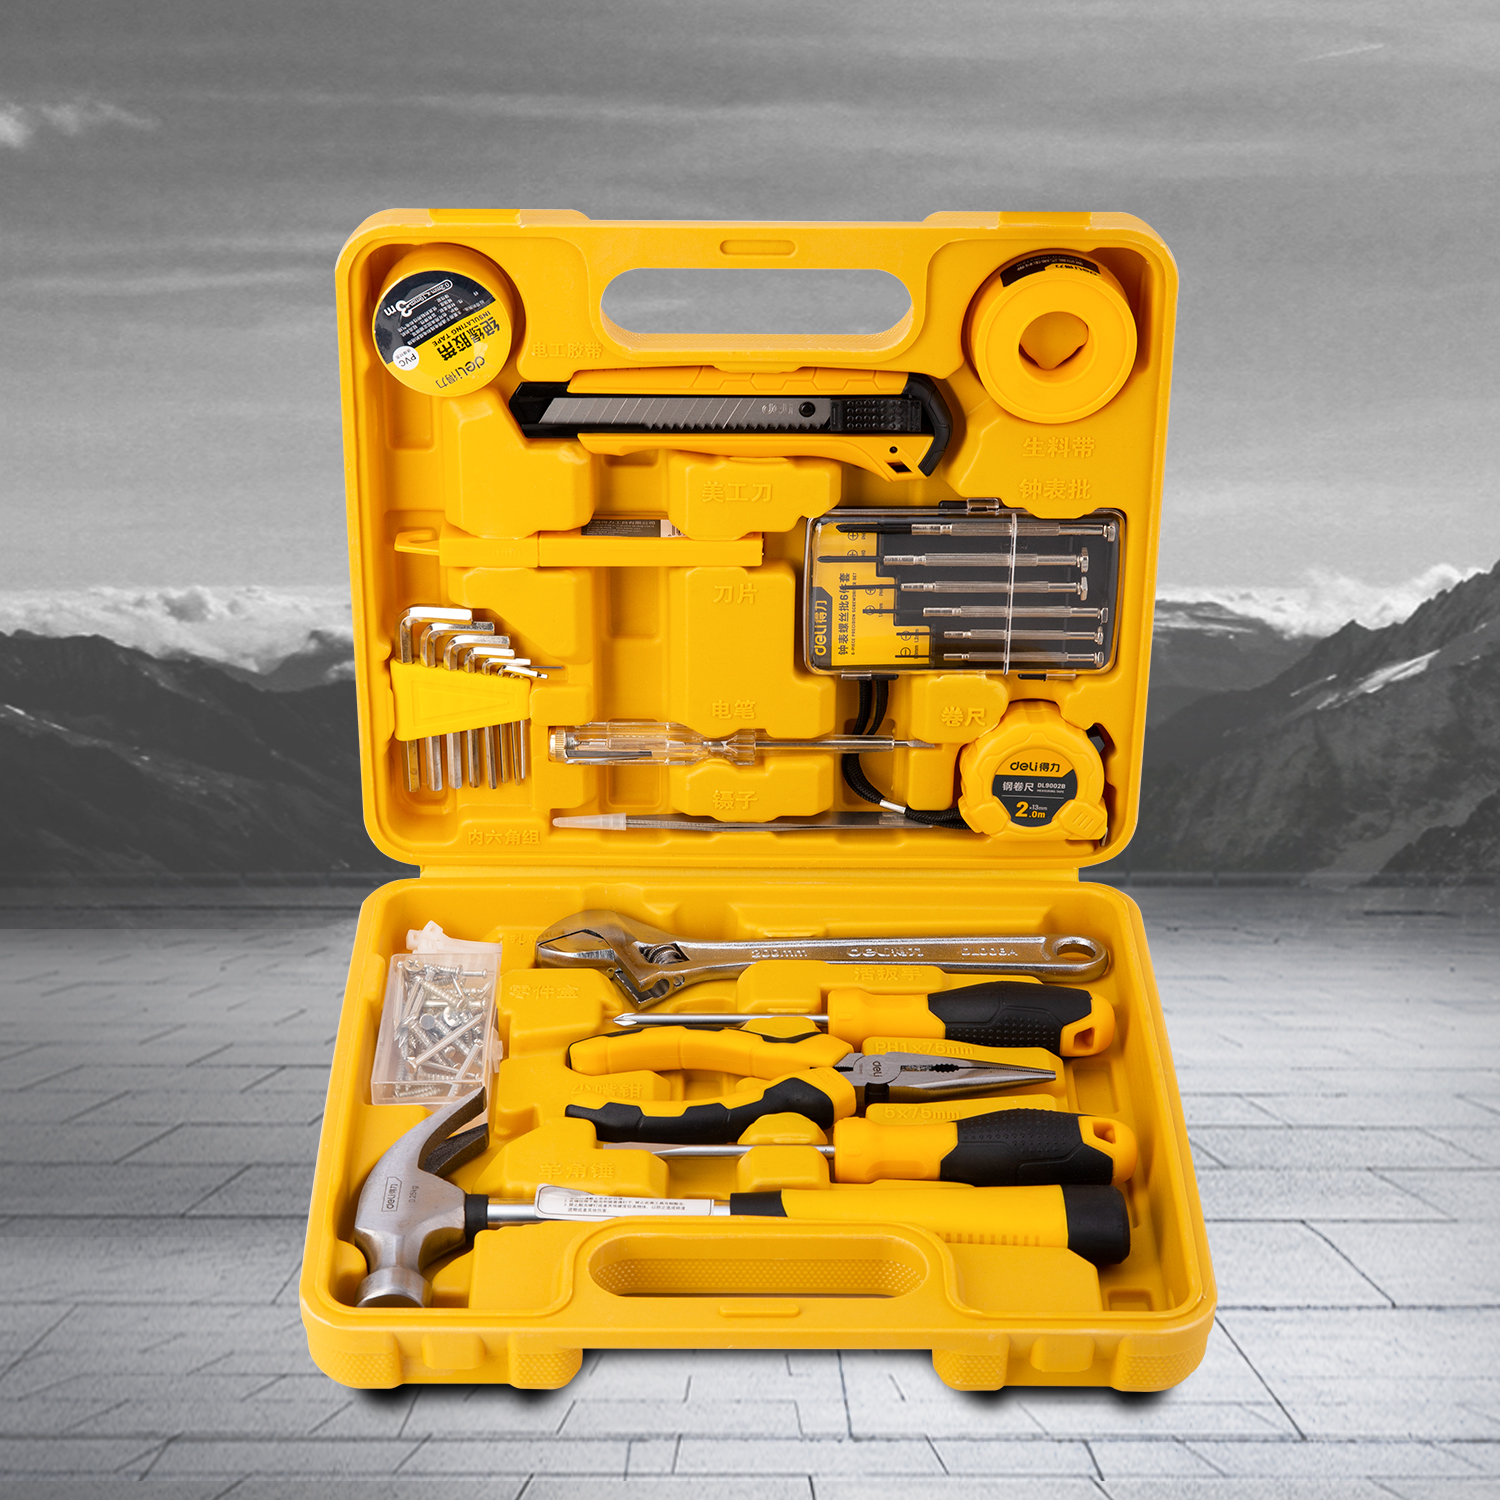 multifunctional Mechanic Tool Sets For Woodworking